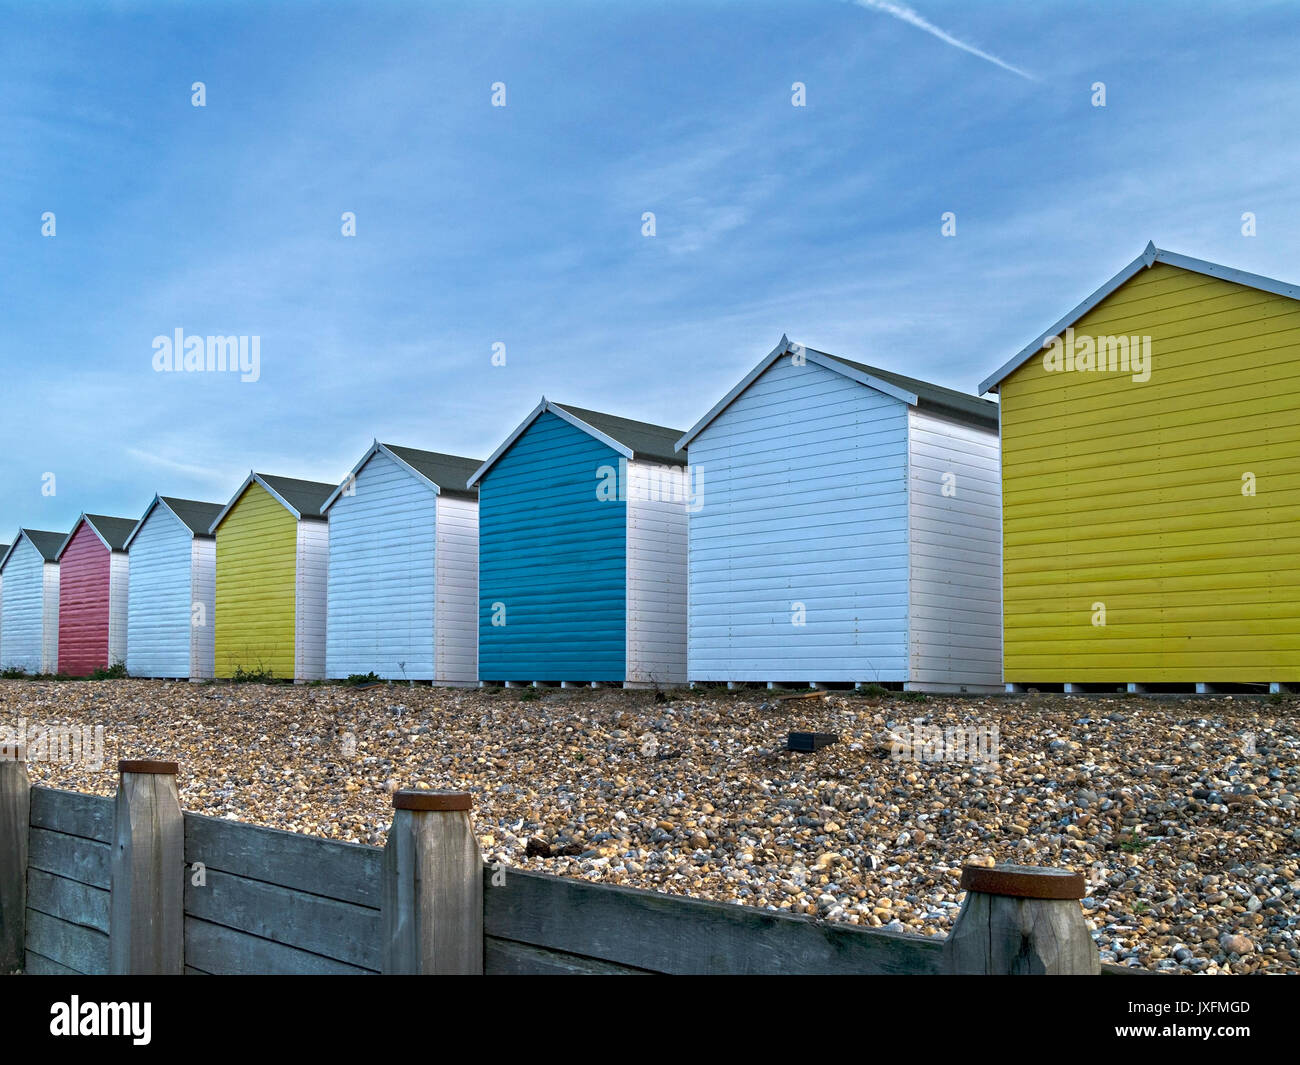 Row of brightly painted colourful wooden beach huts on Eastbourne shingle beach with blue sky above, Eastbourne, East Sussex, England, UK Stock Photo